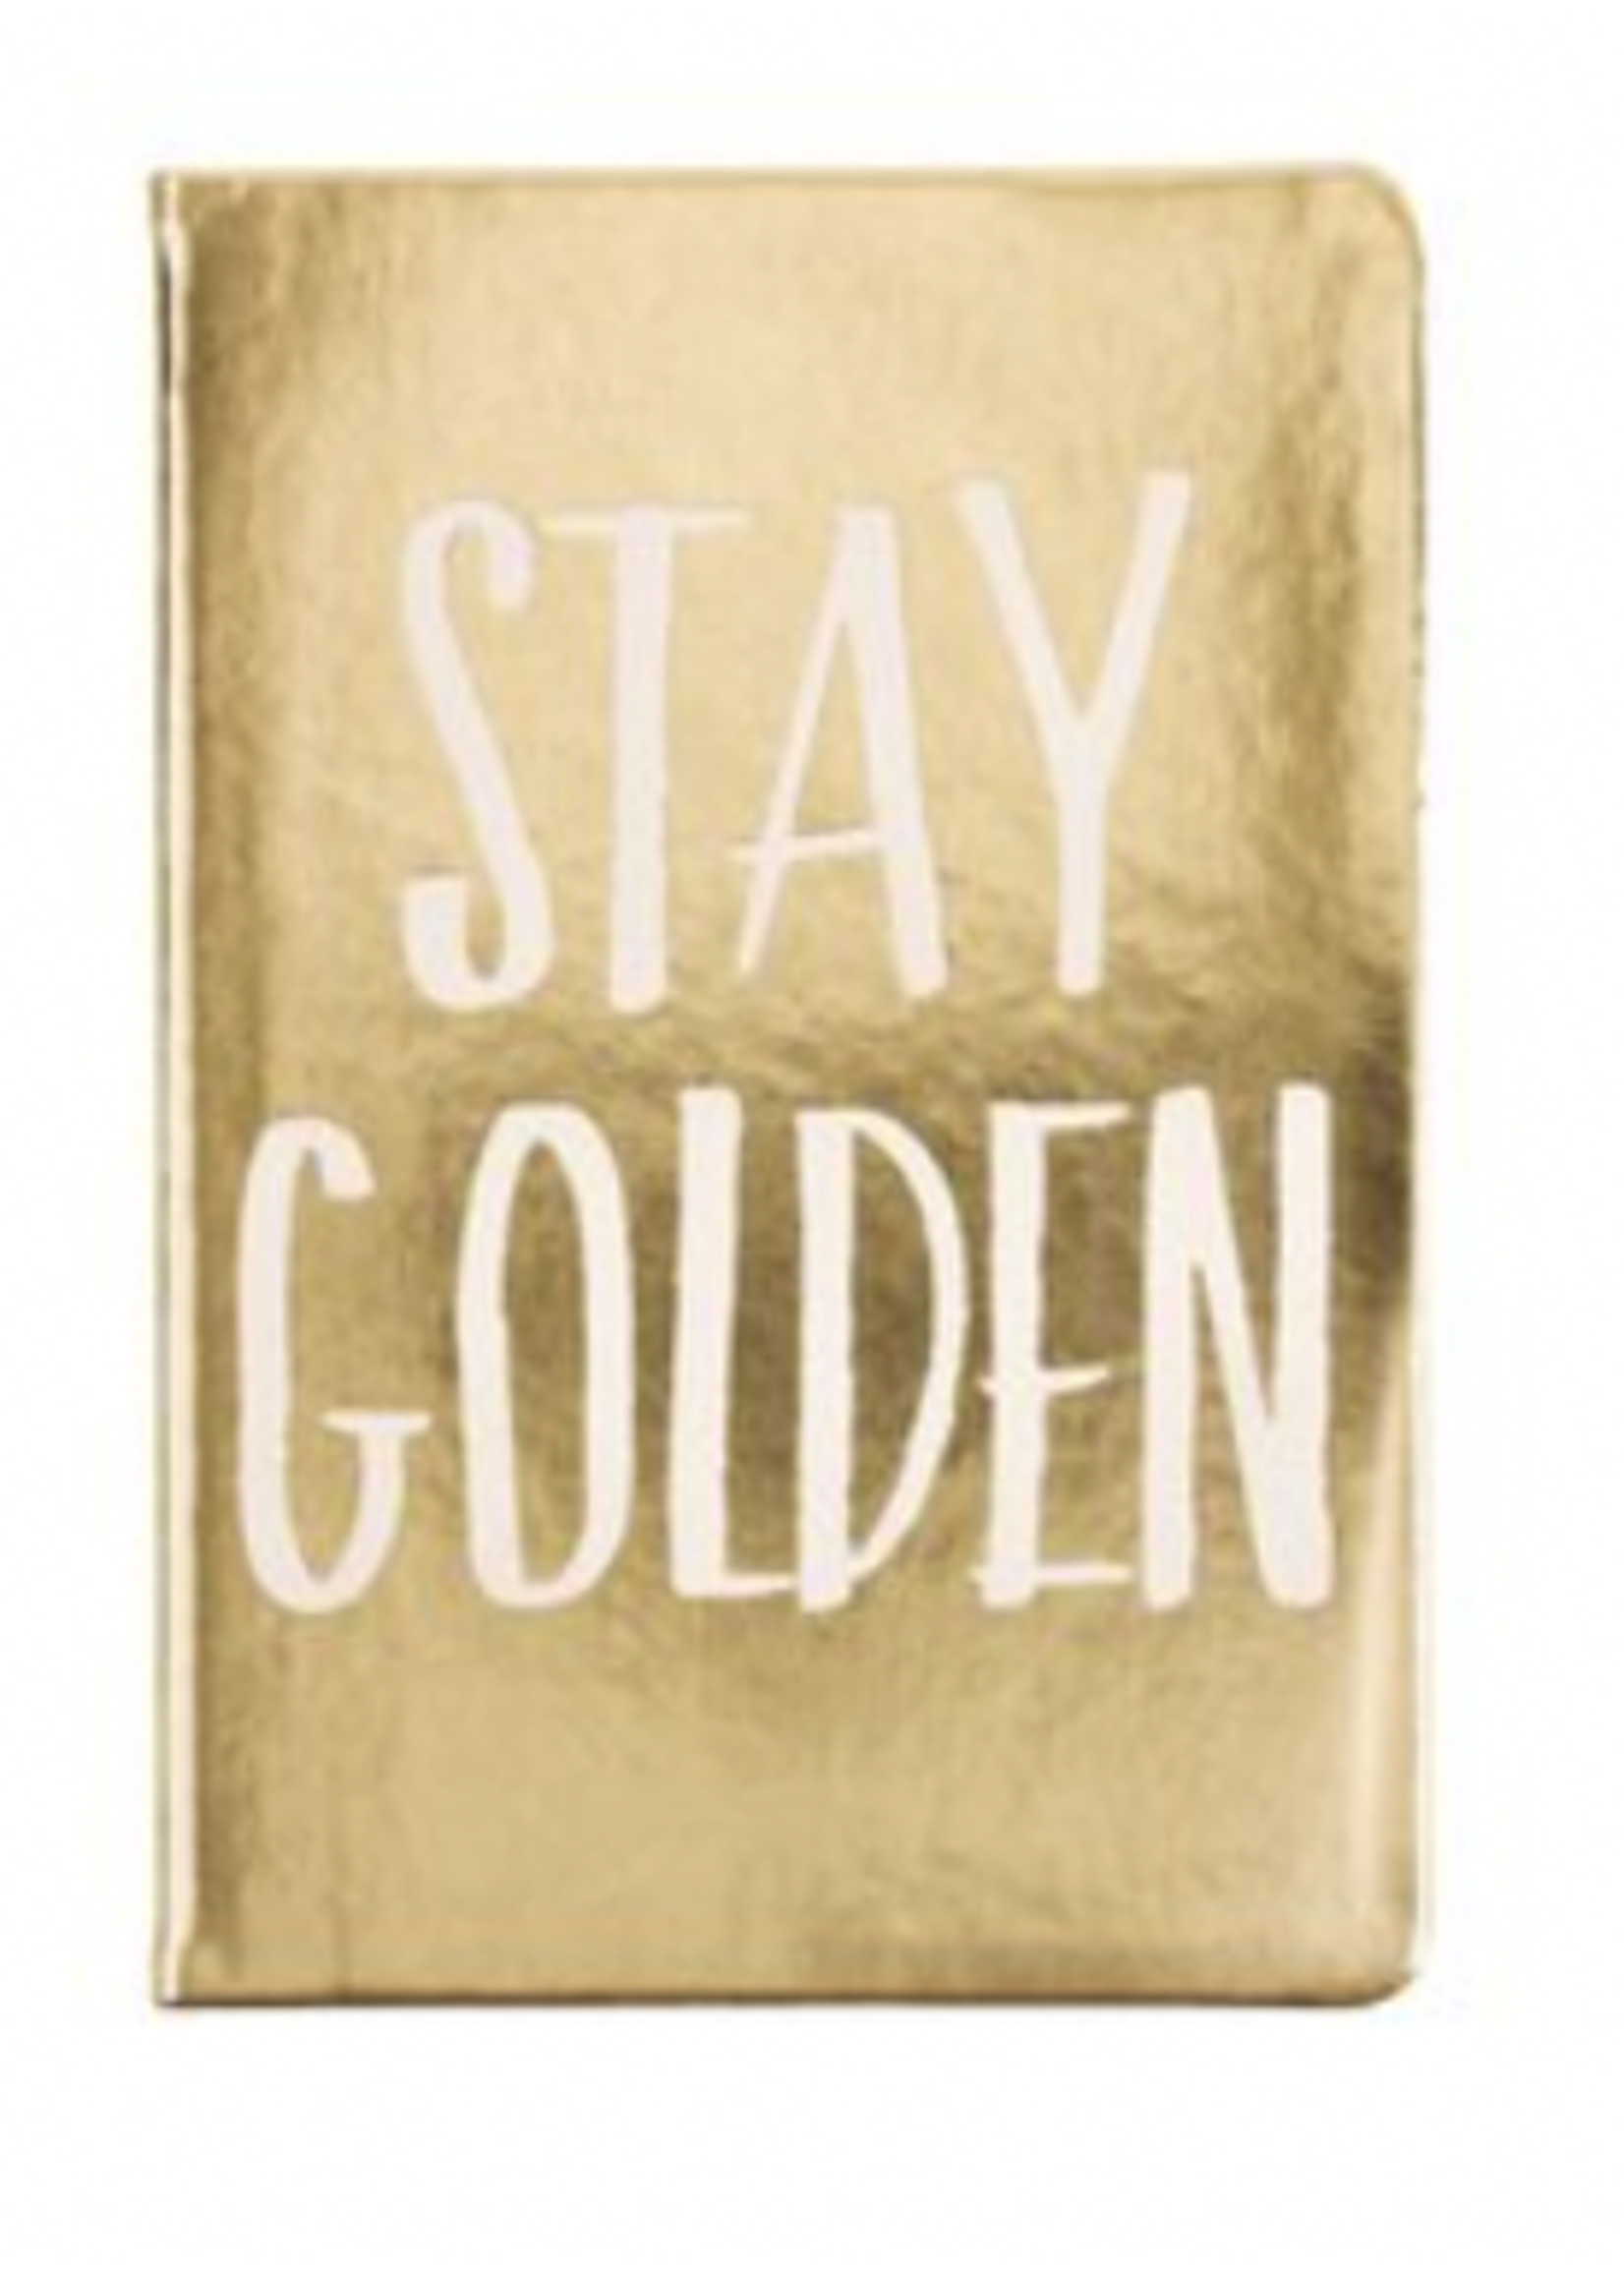 Eccolo Stay Golden Journal